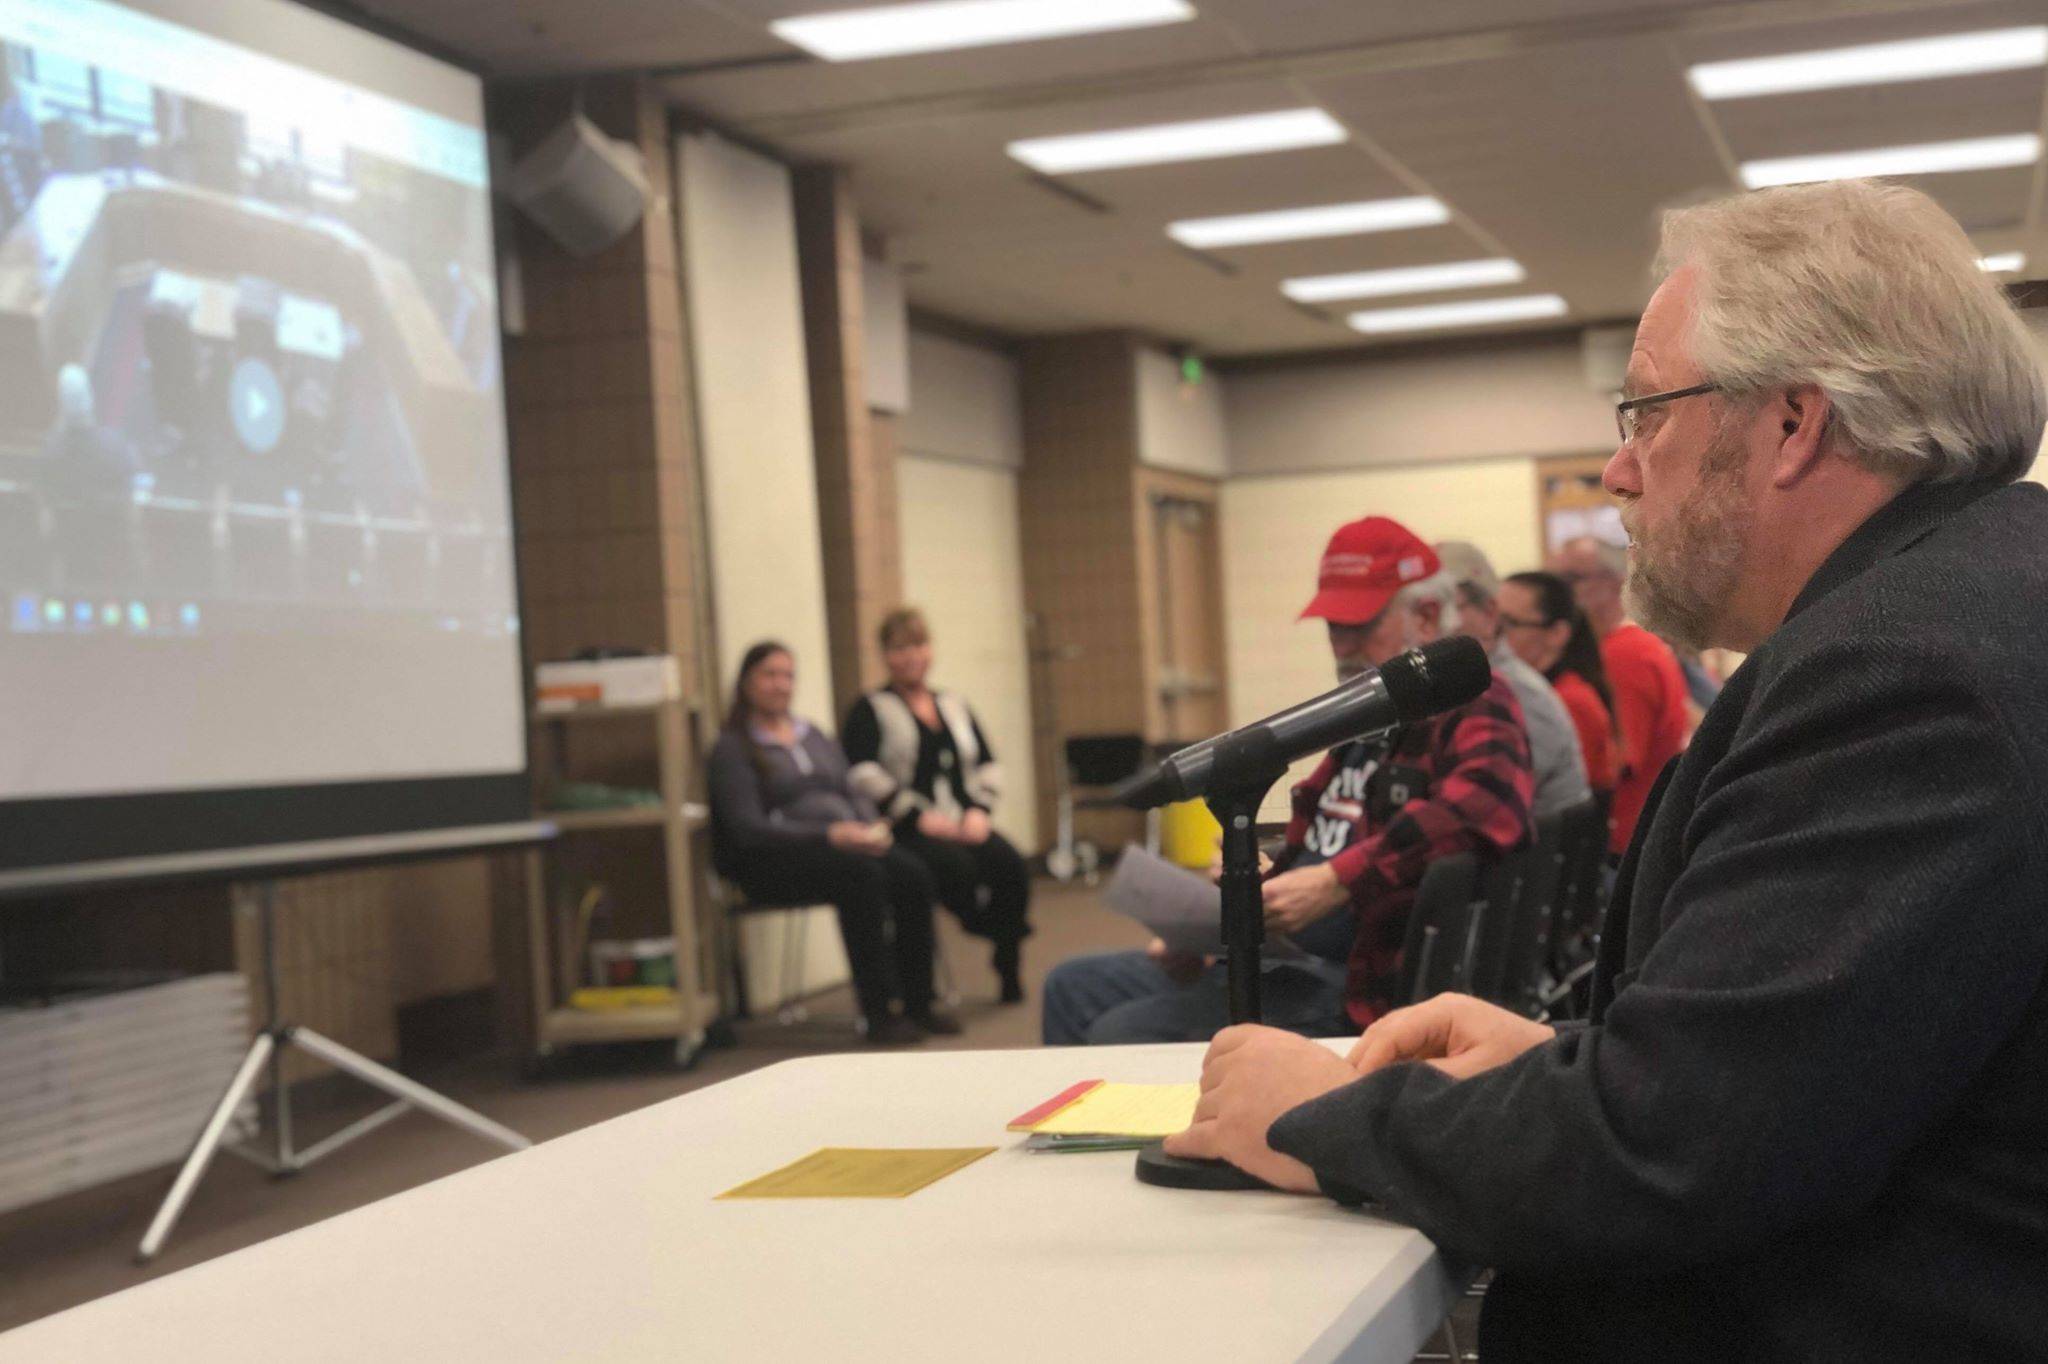 Dave Jones speaks to the House Finance Committee members in support of finding more diversified revenue sources for the state budget on Saturday, March 23, 2019, at the Soldotna Sports Complex in Soldotna, Alaska. (Photo by Victoria Petersen/Peninsula Clarion)